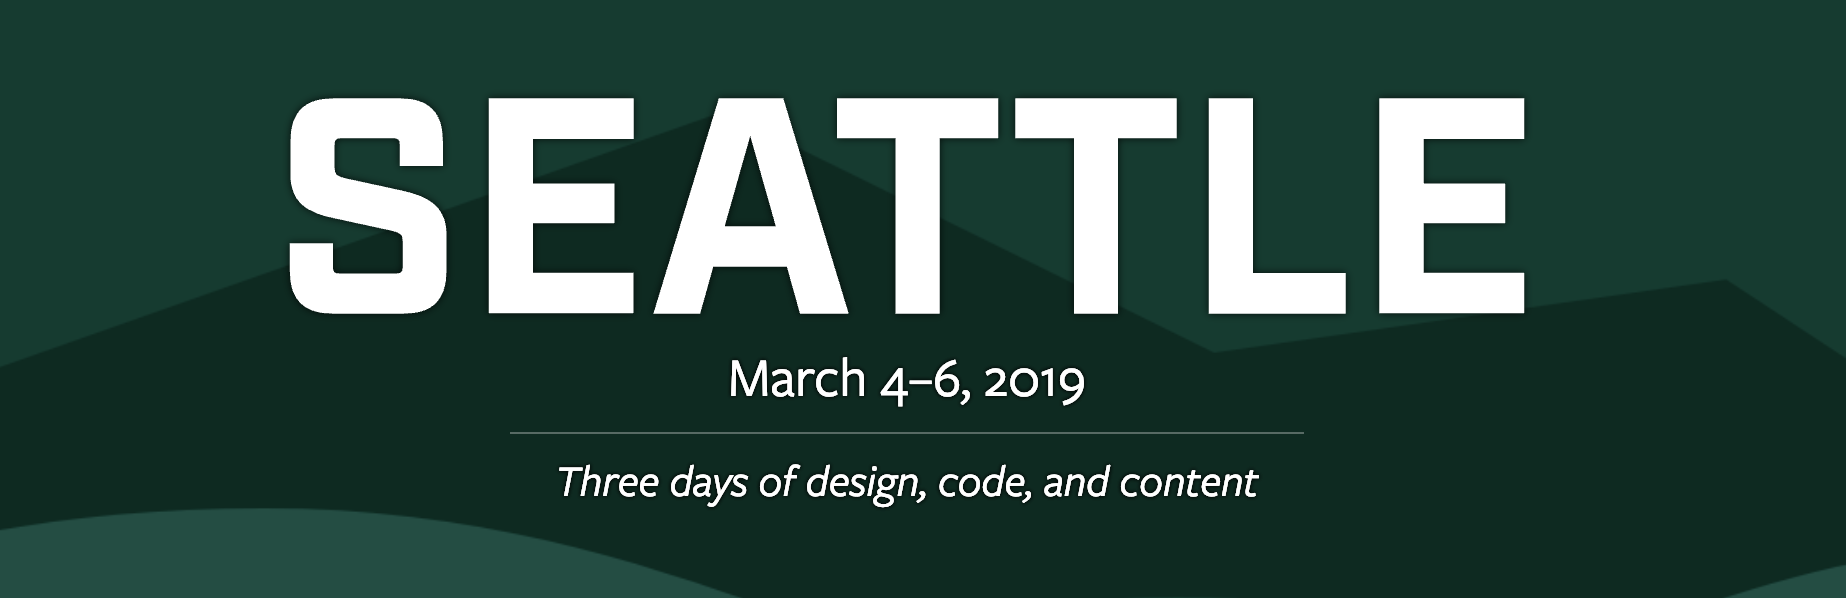 Seattle, March 4-6, 2019, three days of design, code, and content.